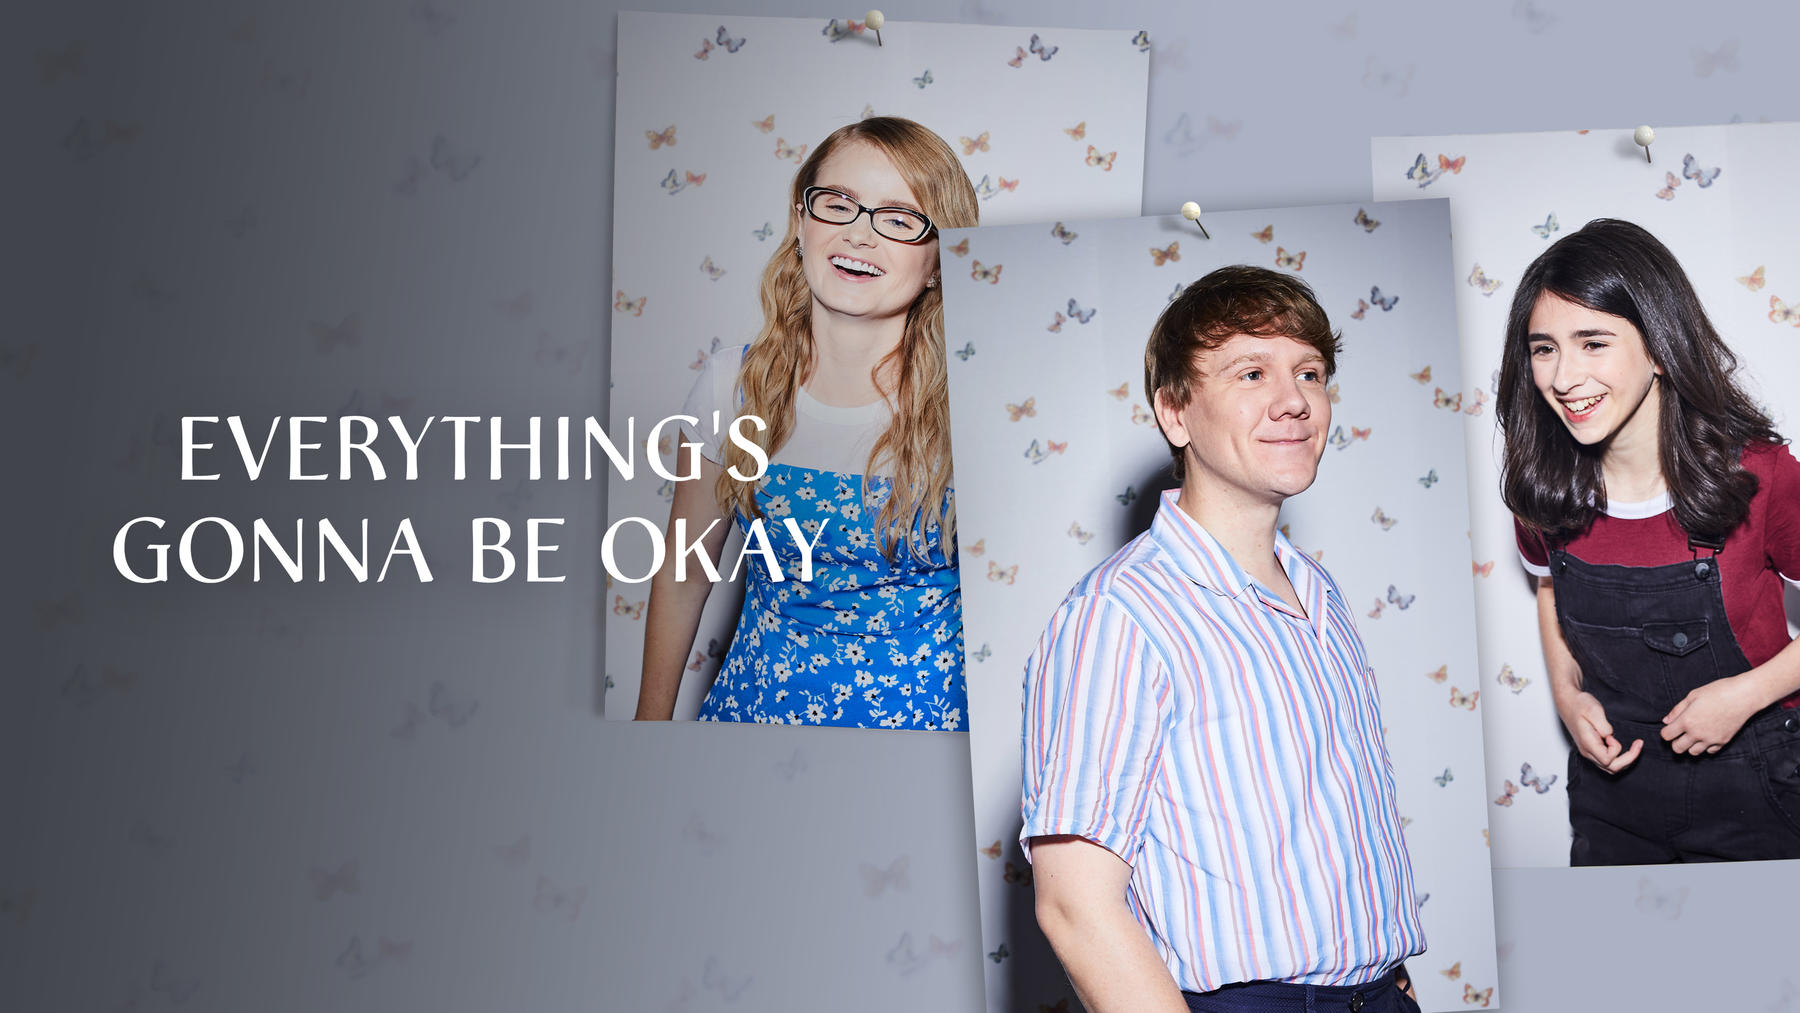 Everything's gonna be okay